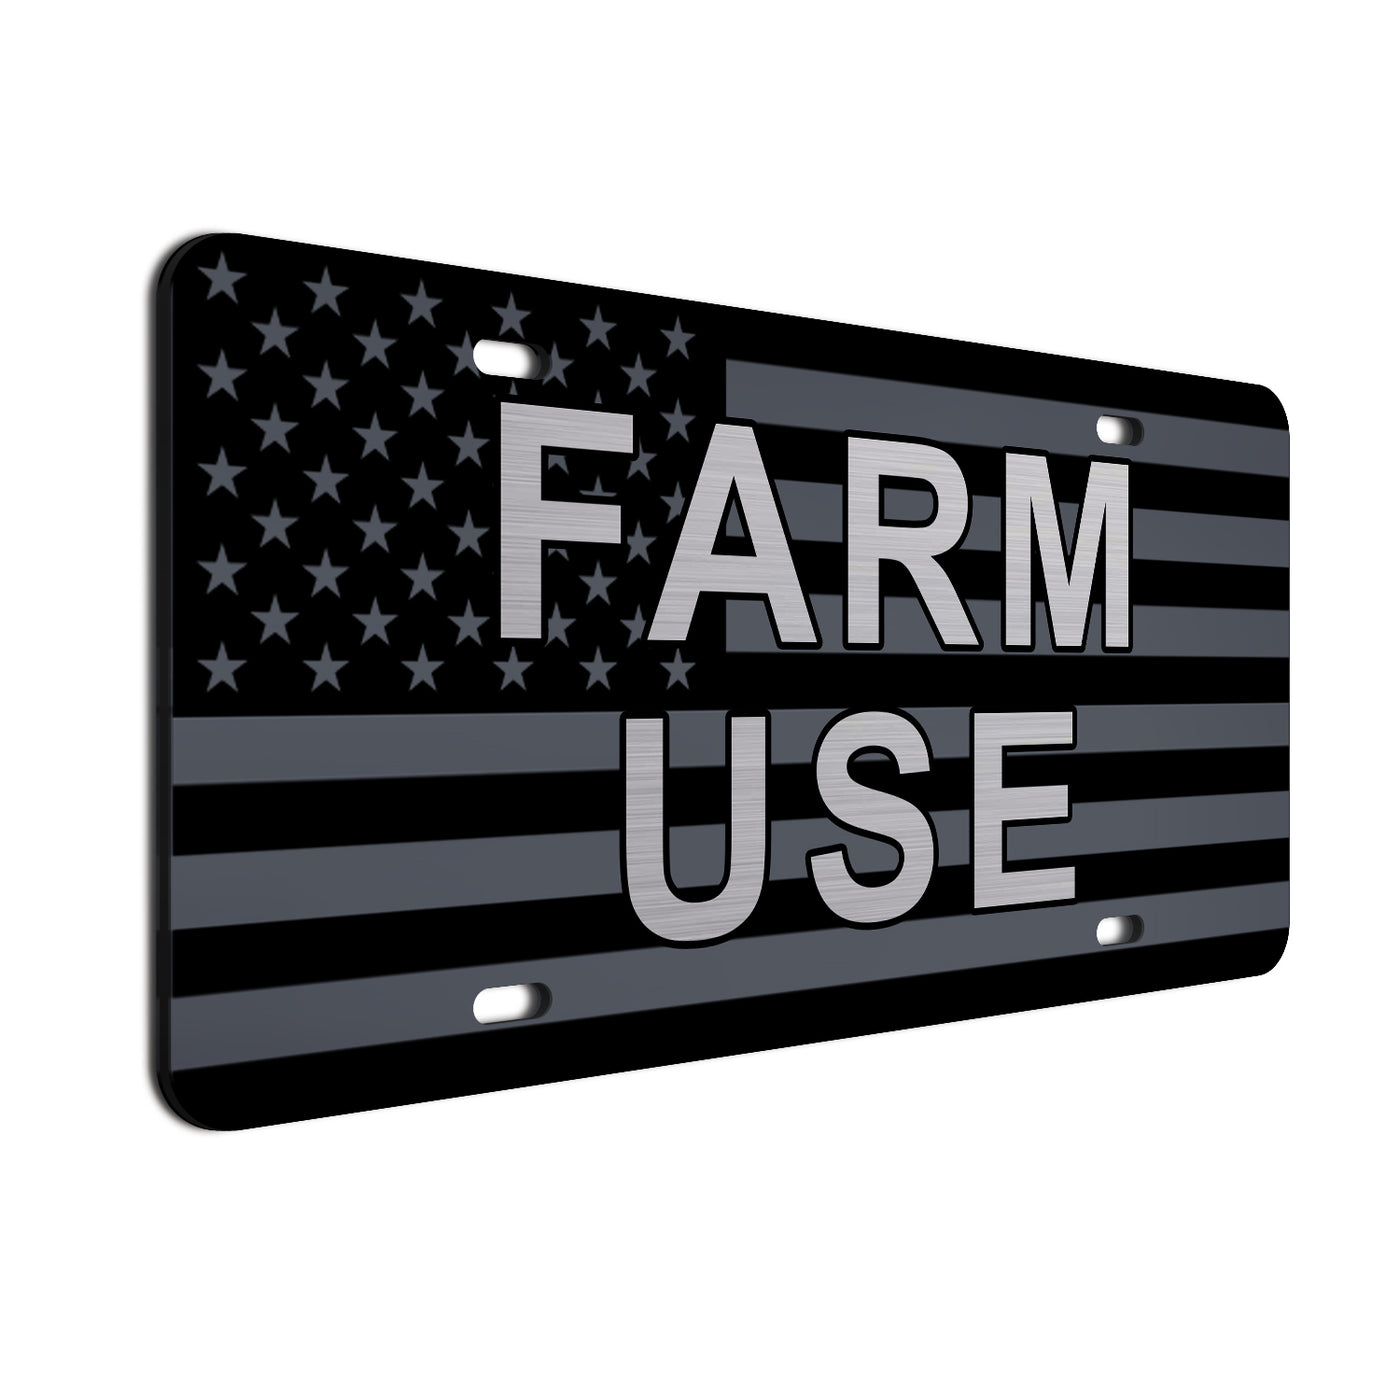 Farm Use License Plate | Durable Car Tag | Gift for Farmers | UV Printed| Made in the USA